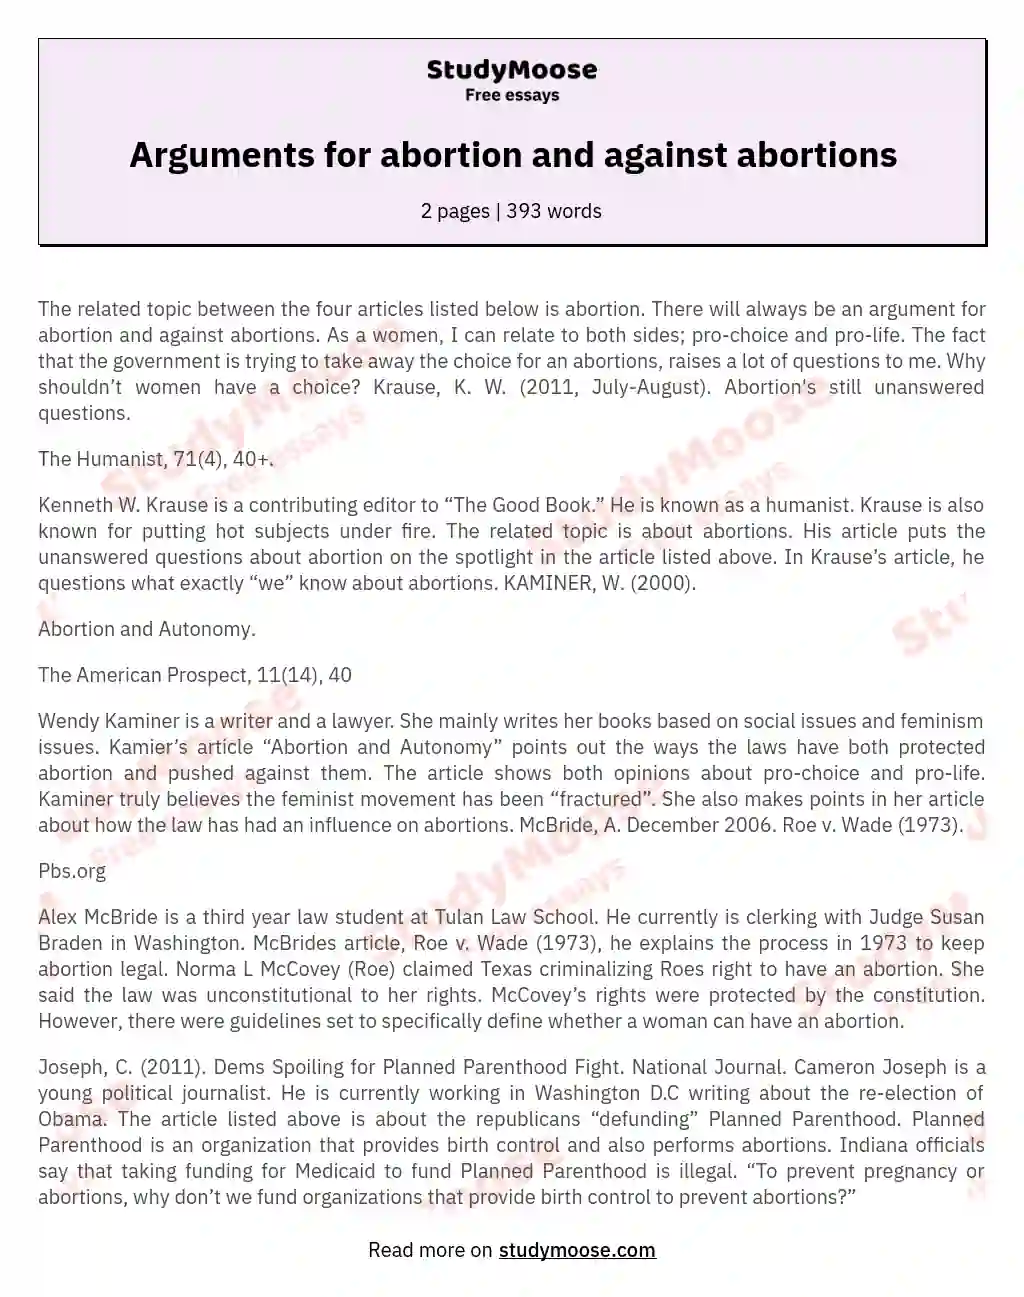 Arguments for abortion and against abortions